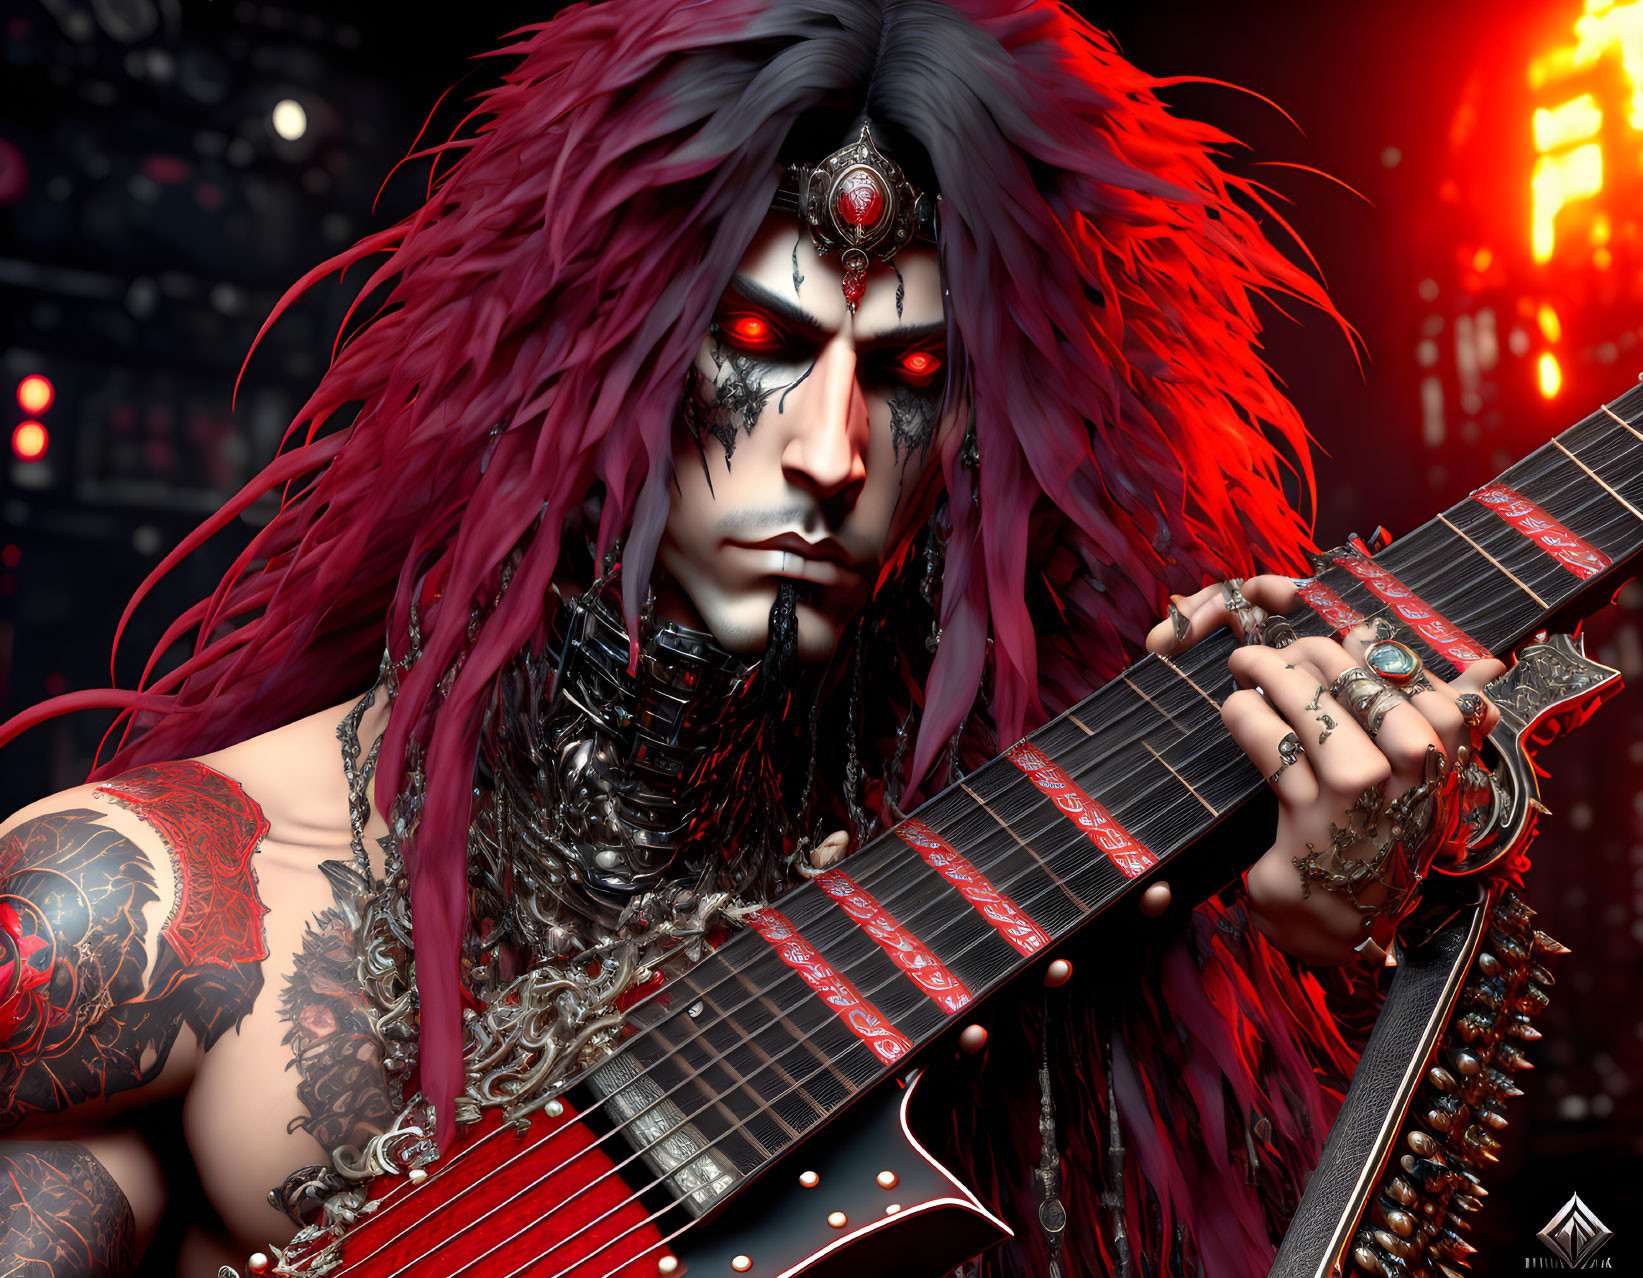 Intense character with red eyes and hair playing electric guitar